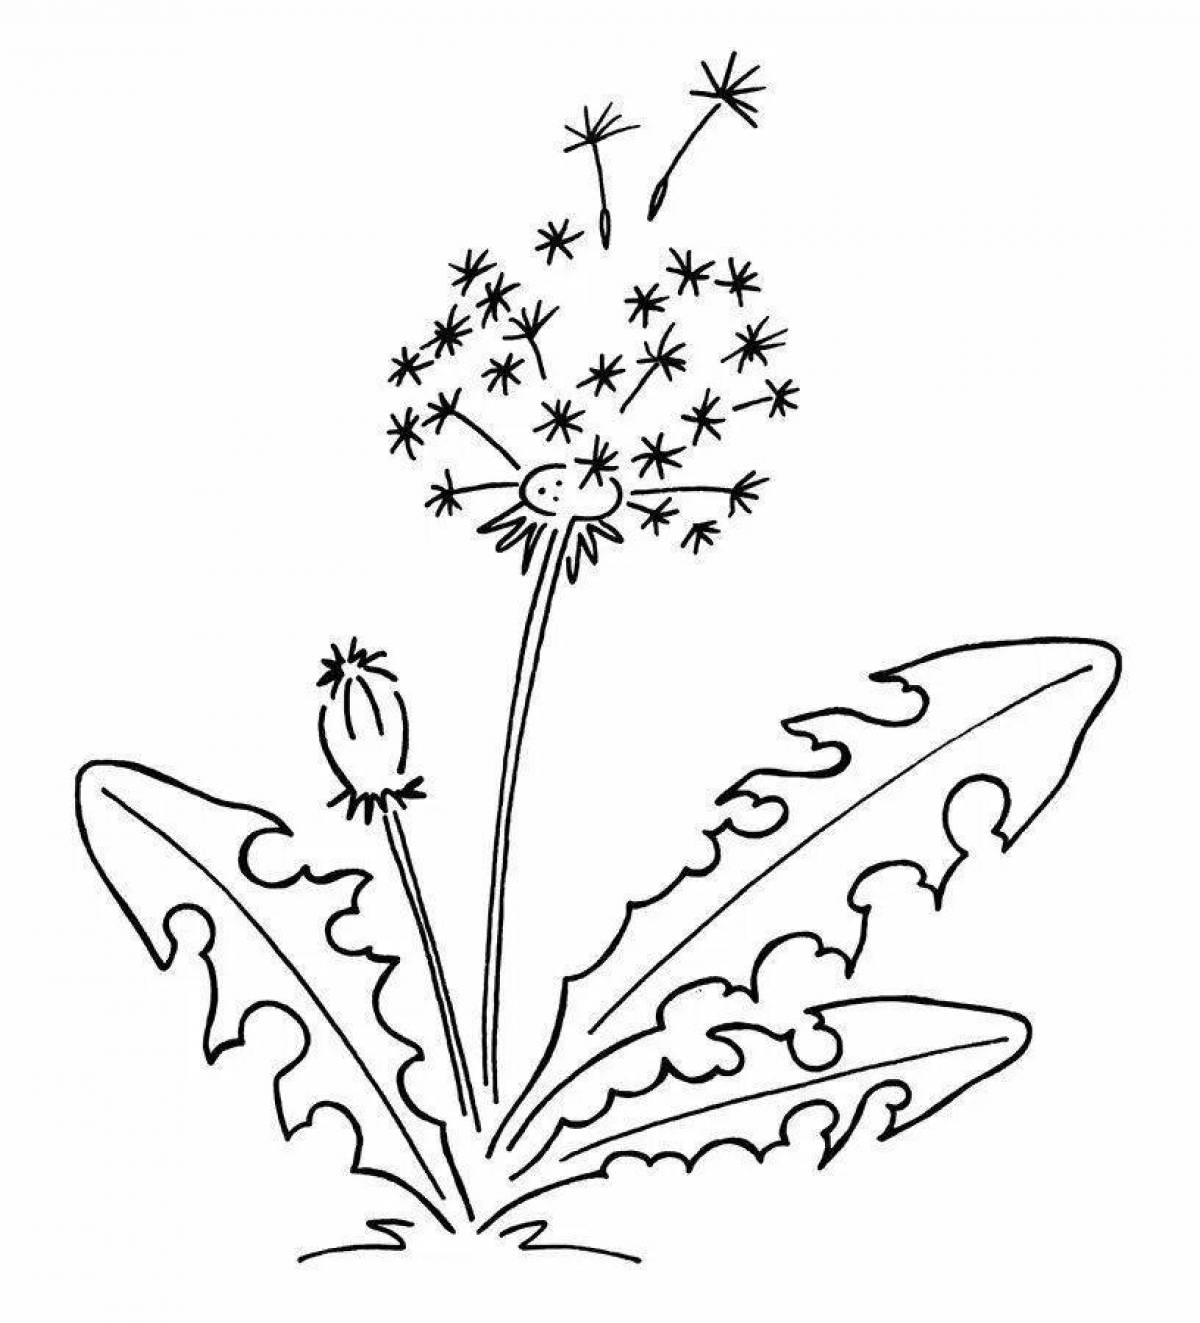 Amazing dandelion coloring book for kids